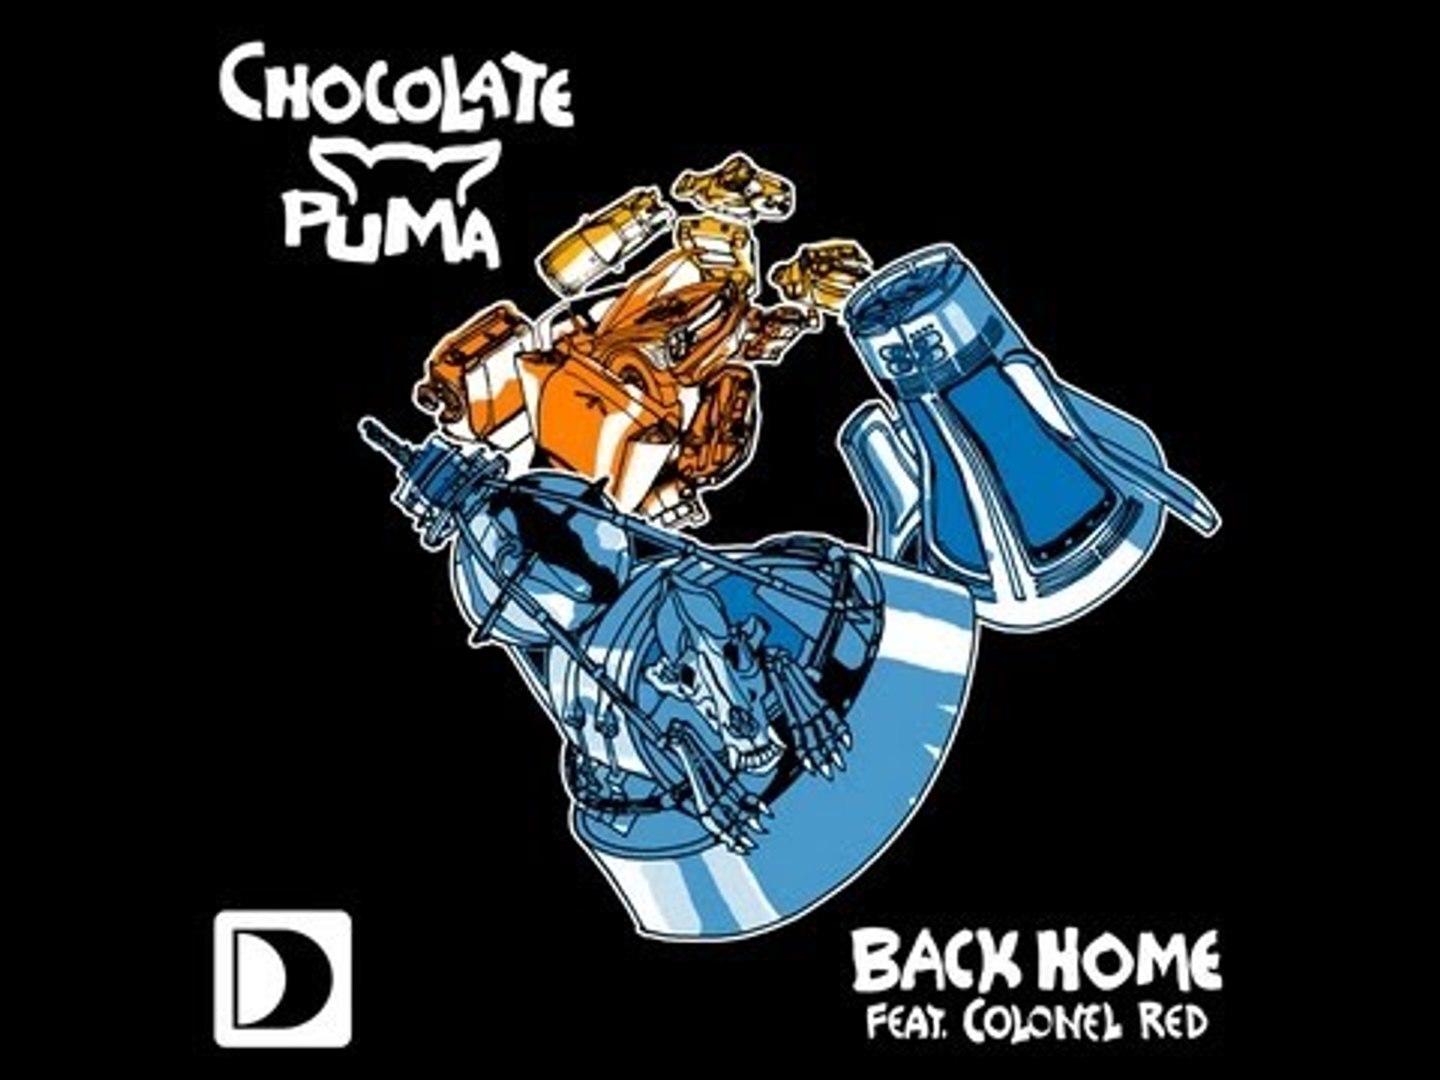 Chocolate Puma featuring Colonel Red - Back Home [Full Length] - video  Dailymotion